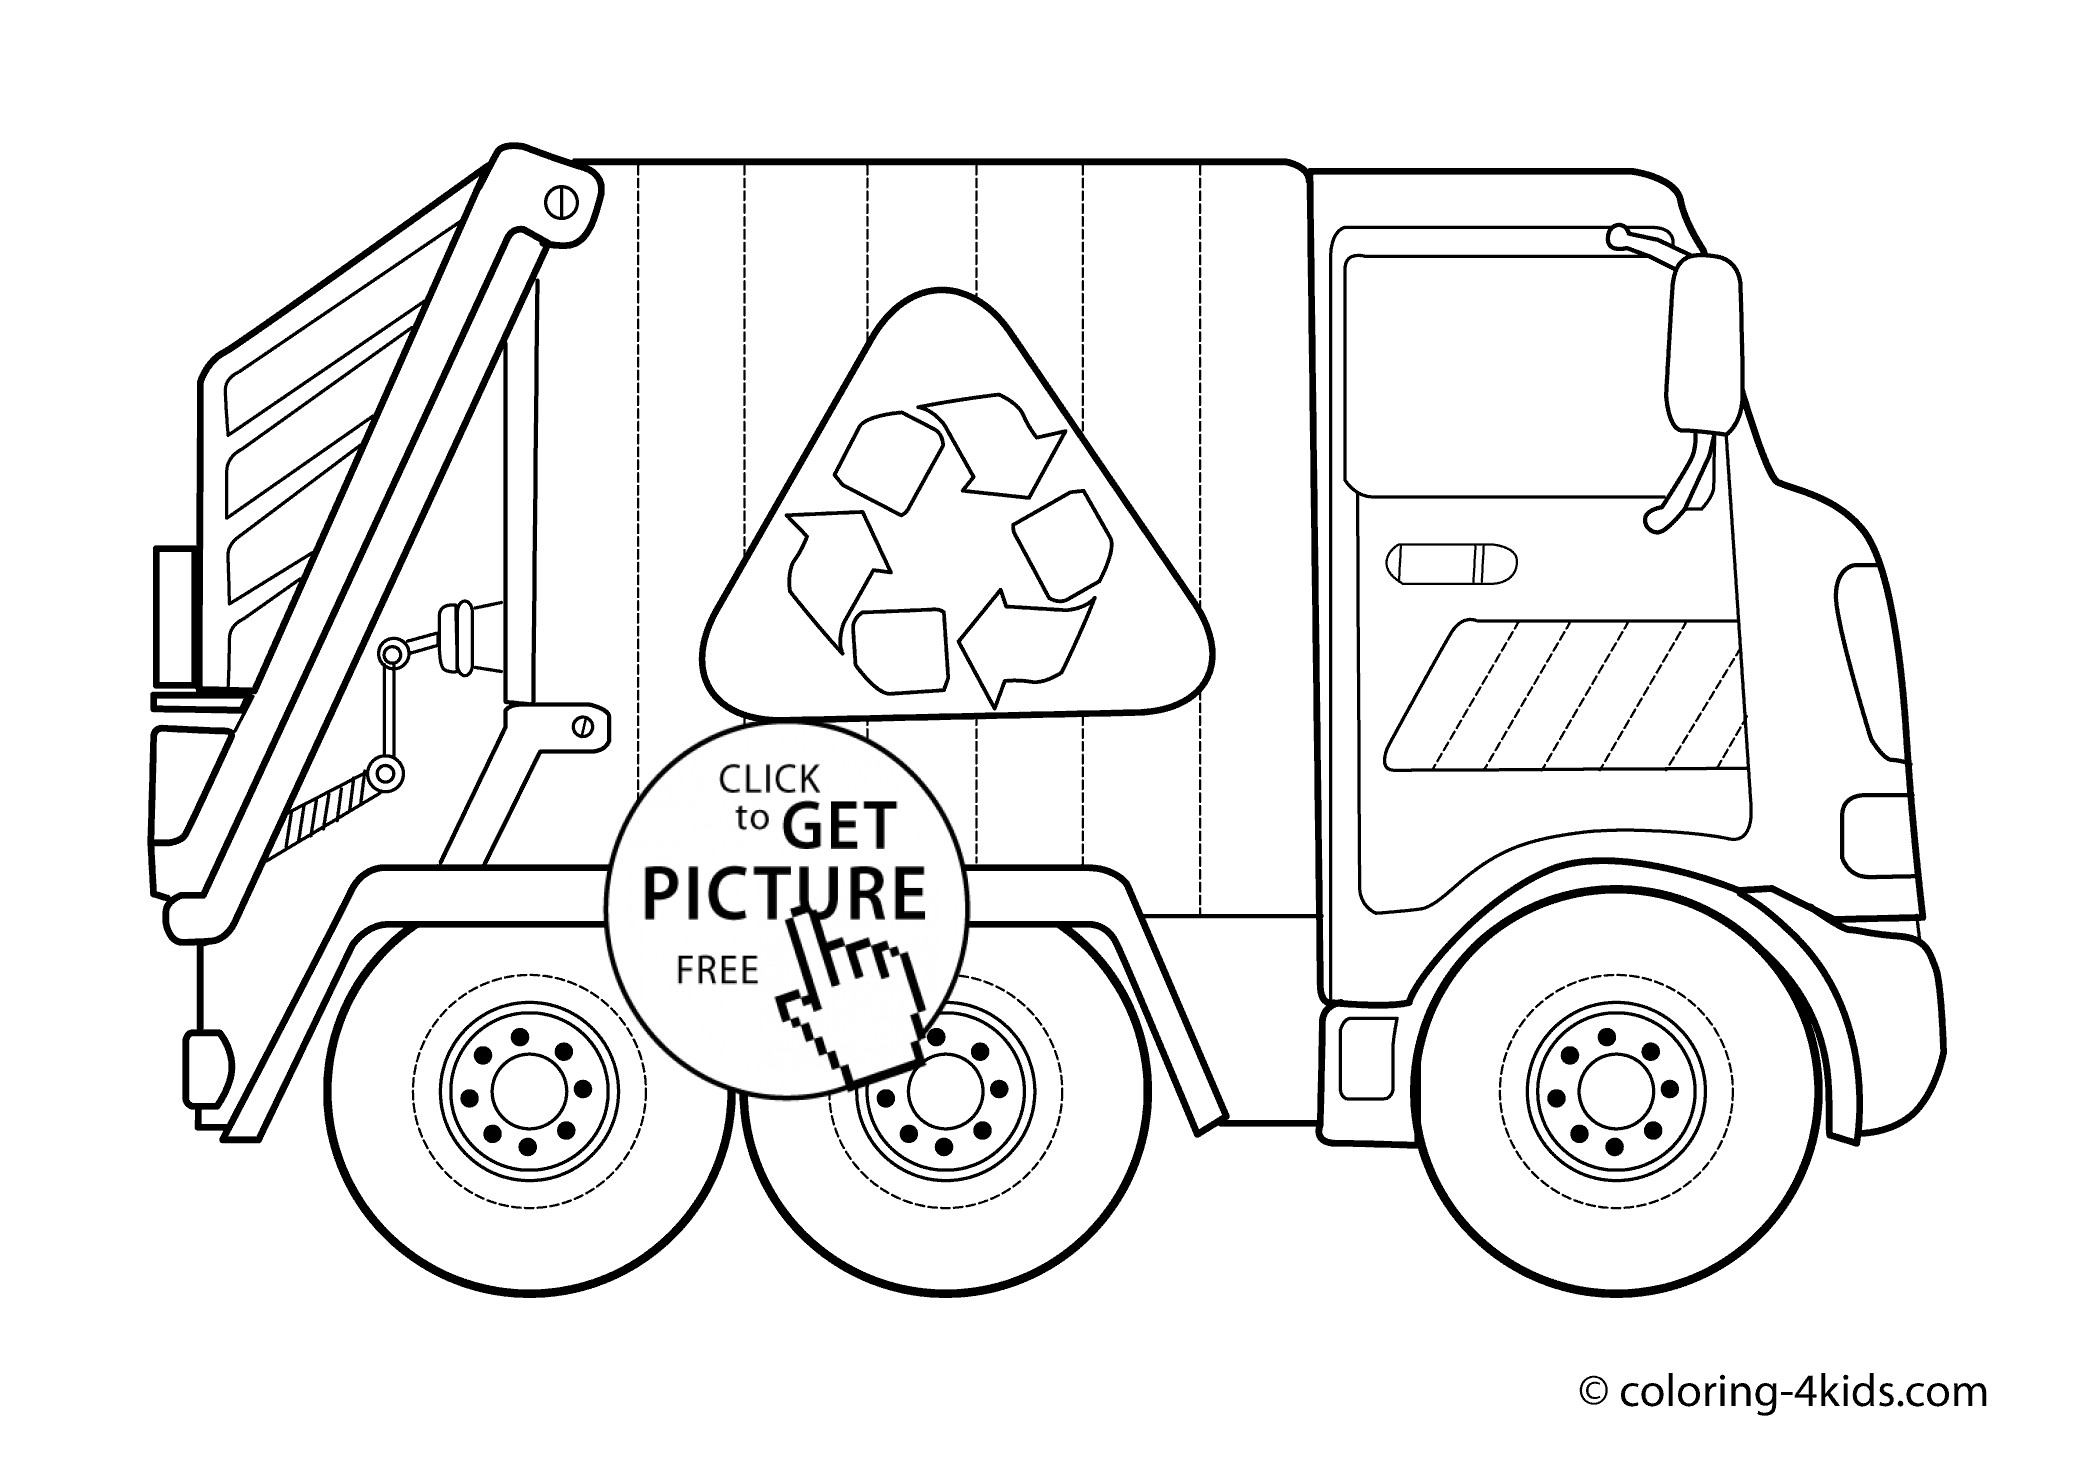 Garbage Truck Printable Coloring Pages
 Garbage Truck Transportation Coloring Pages for kids